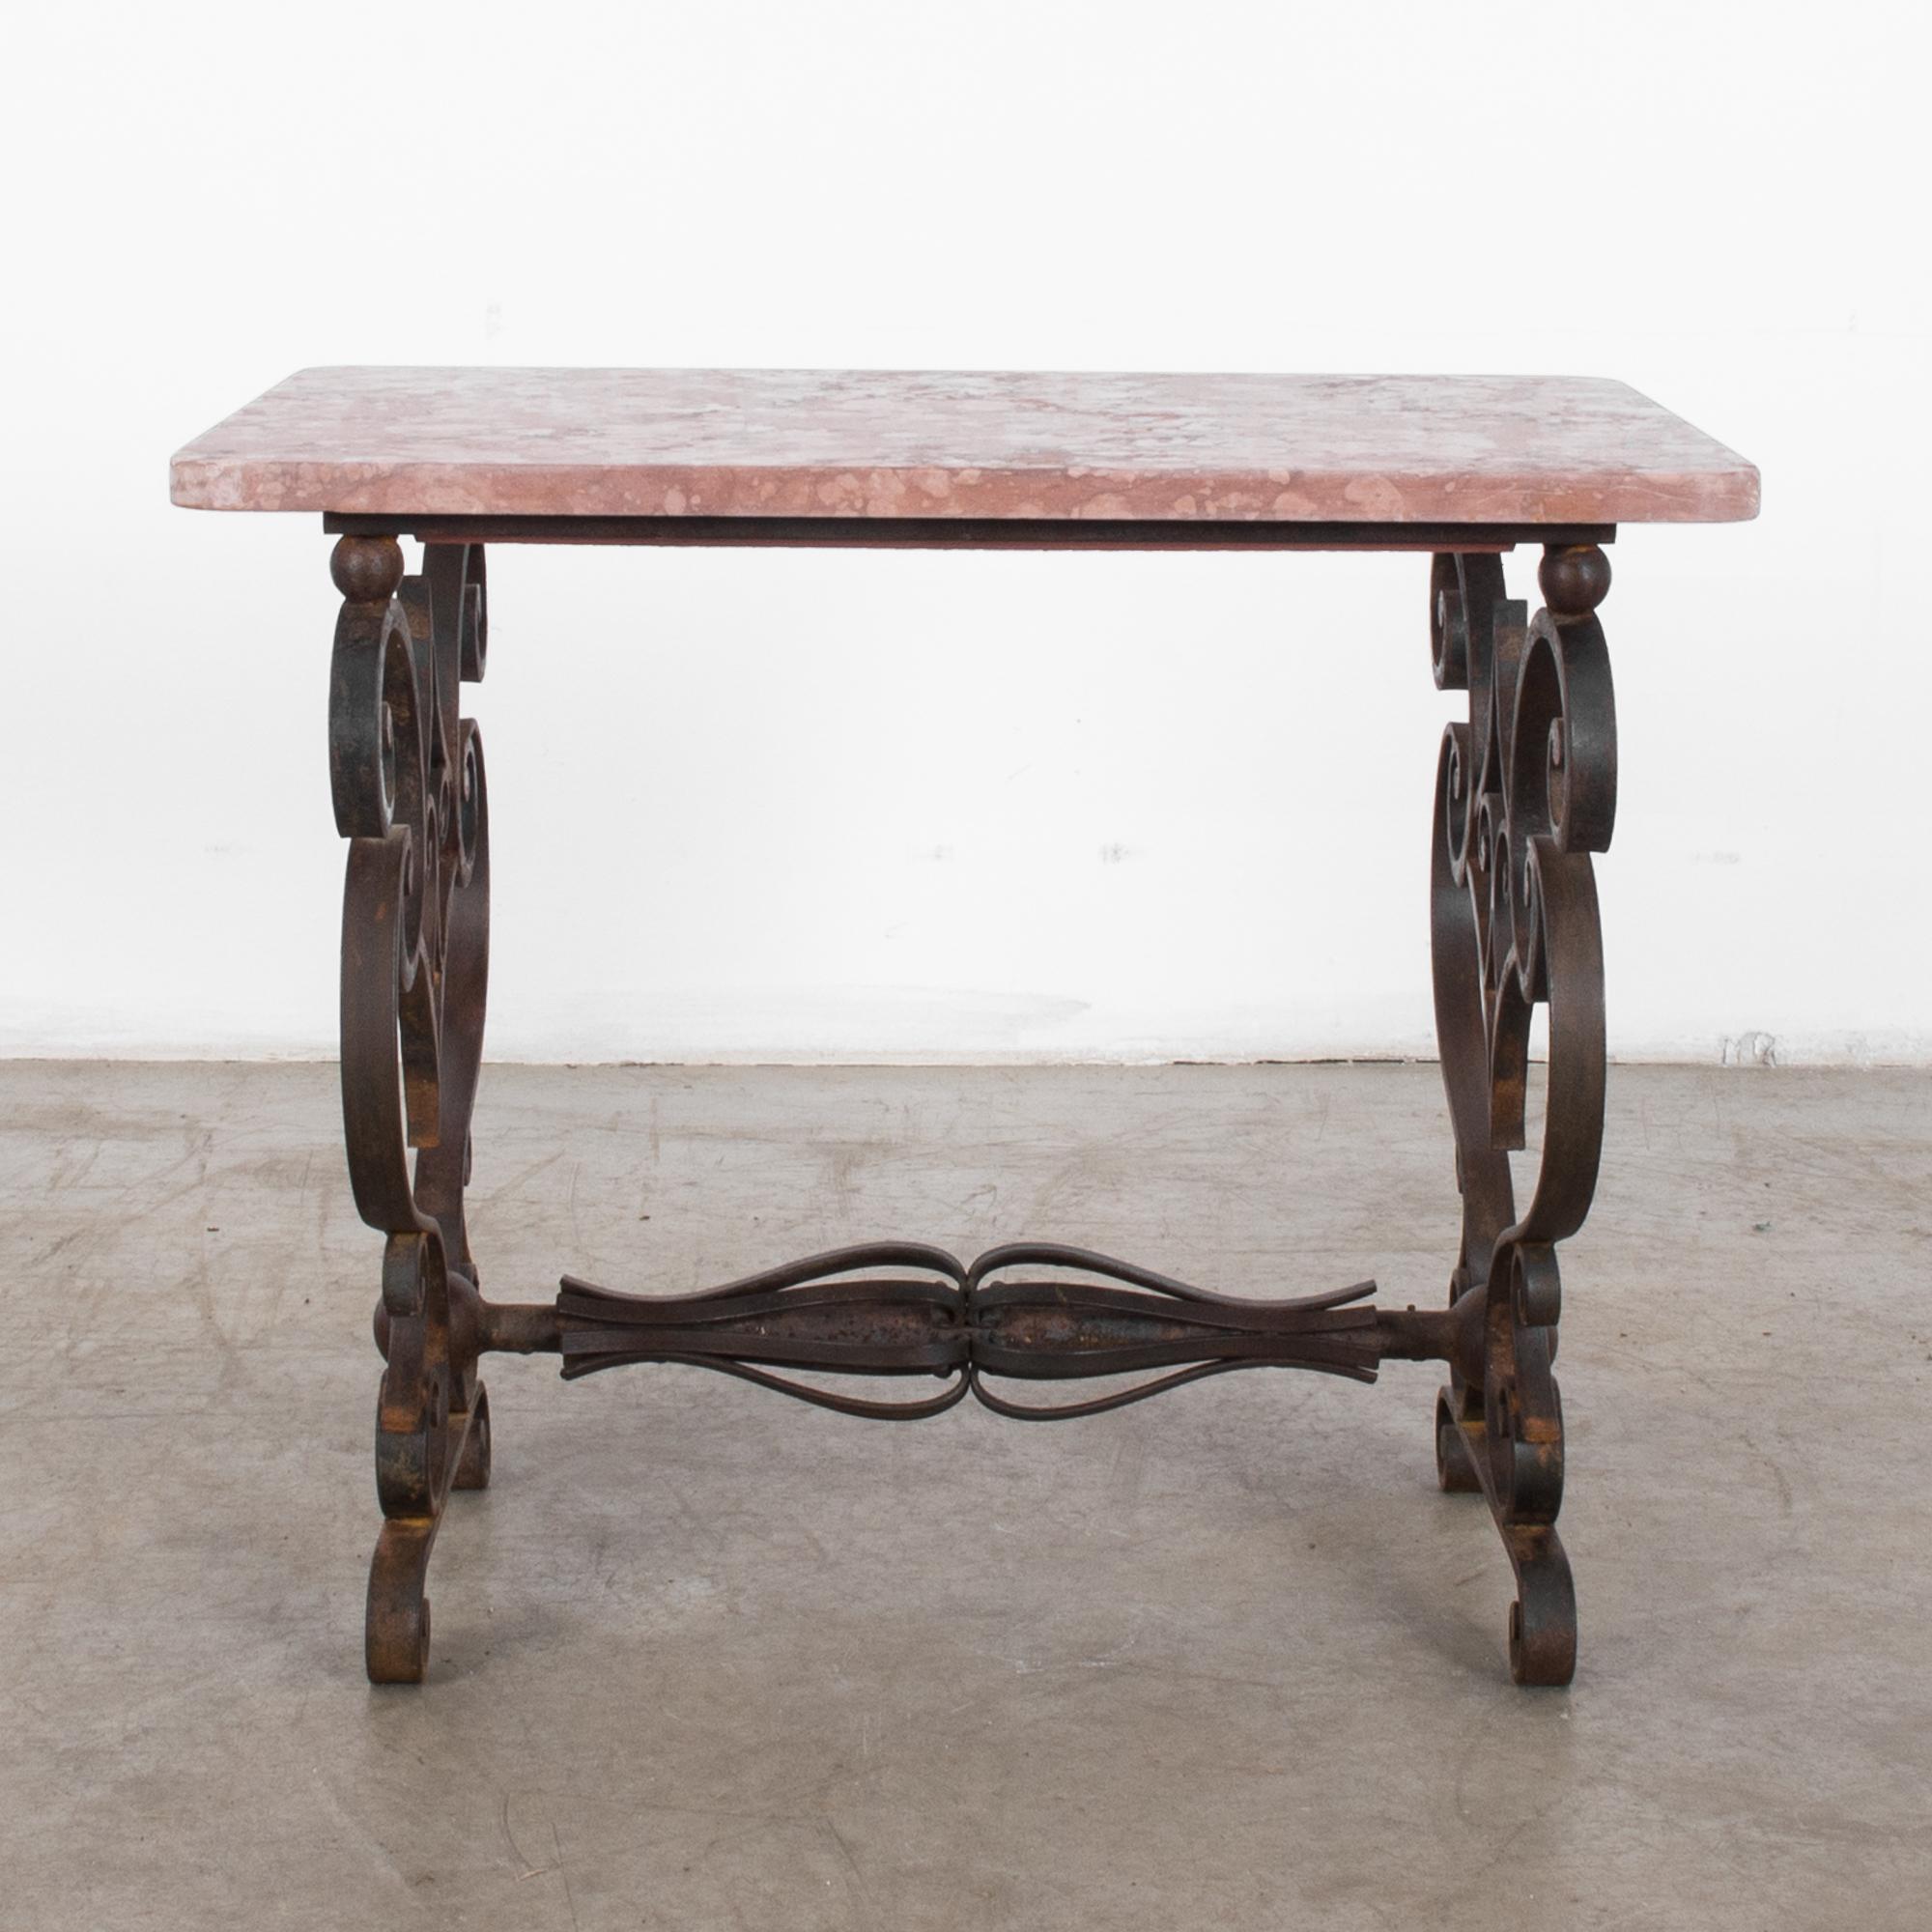 This coffee table was made in France, circa 1940. The rectangular, deep pink marble top rests on an iron frame and presents a stunning accent to any room. The decorative legs feature exquisite scrollwork and flank two whisk-shaped designs on the